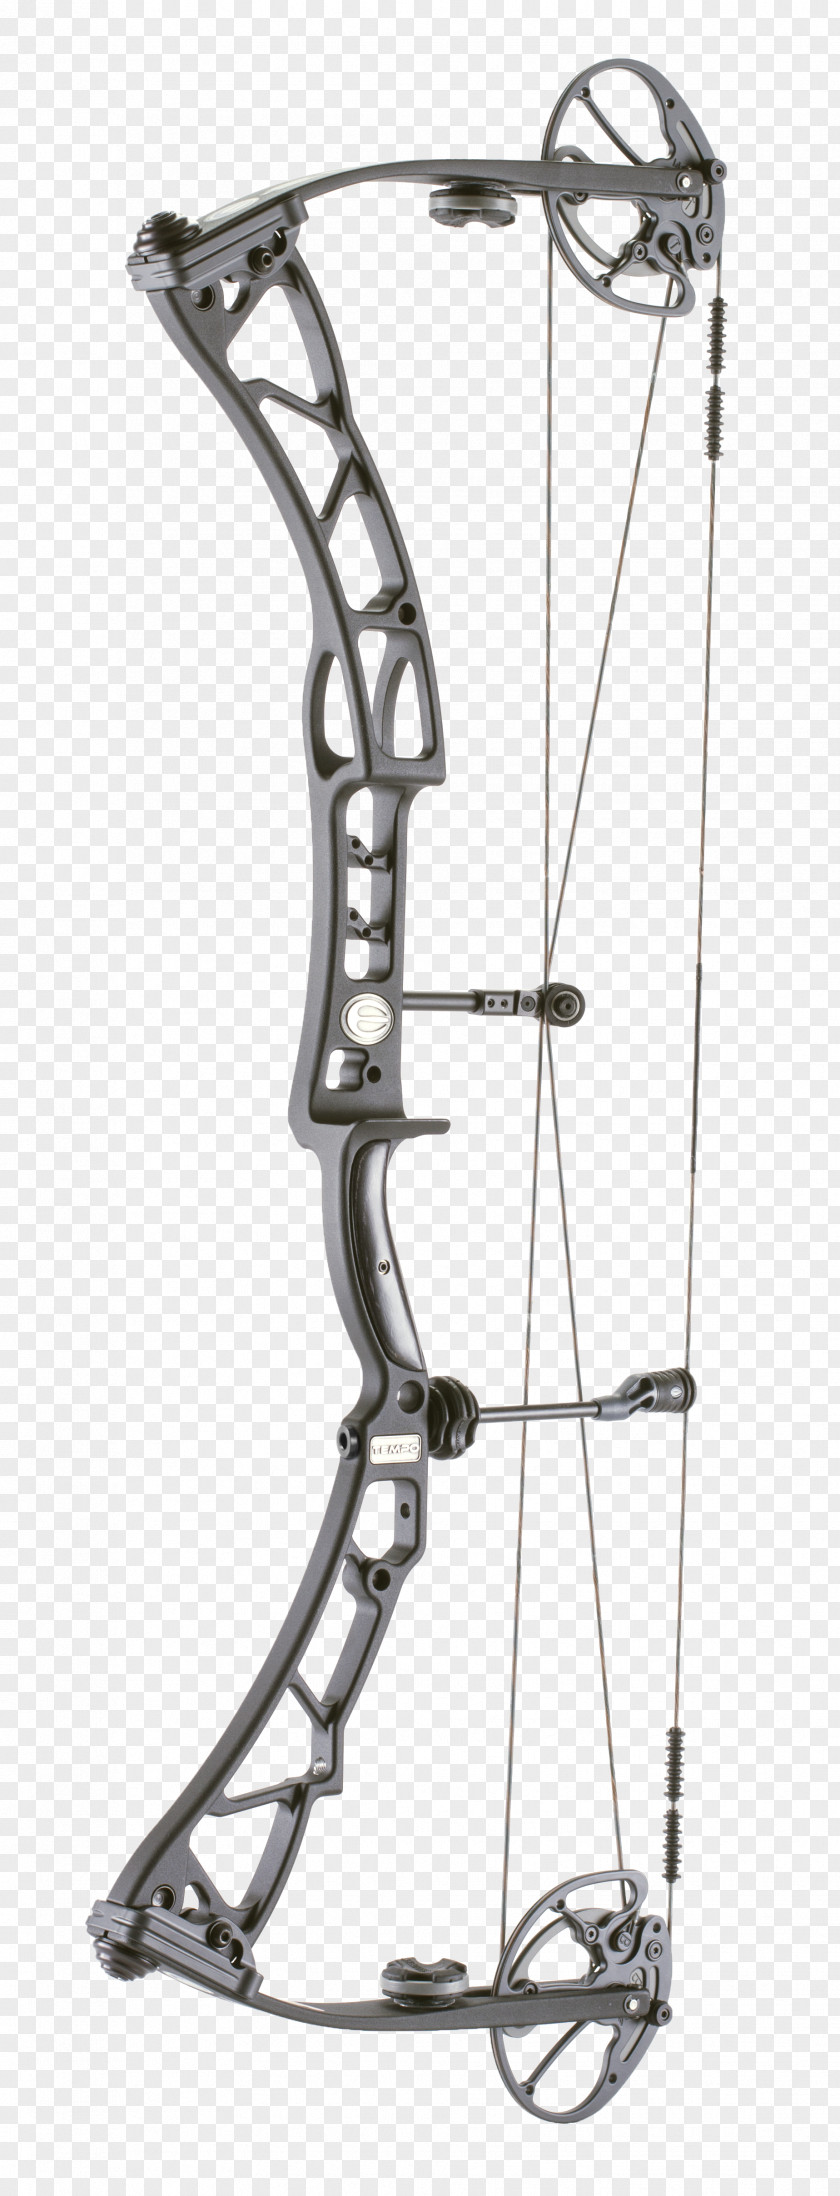 Compound Bows Target Archery Bow And Arrow Bowhunting PNG